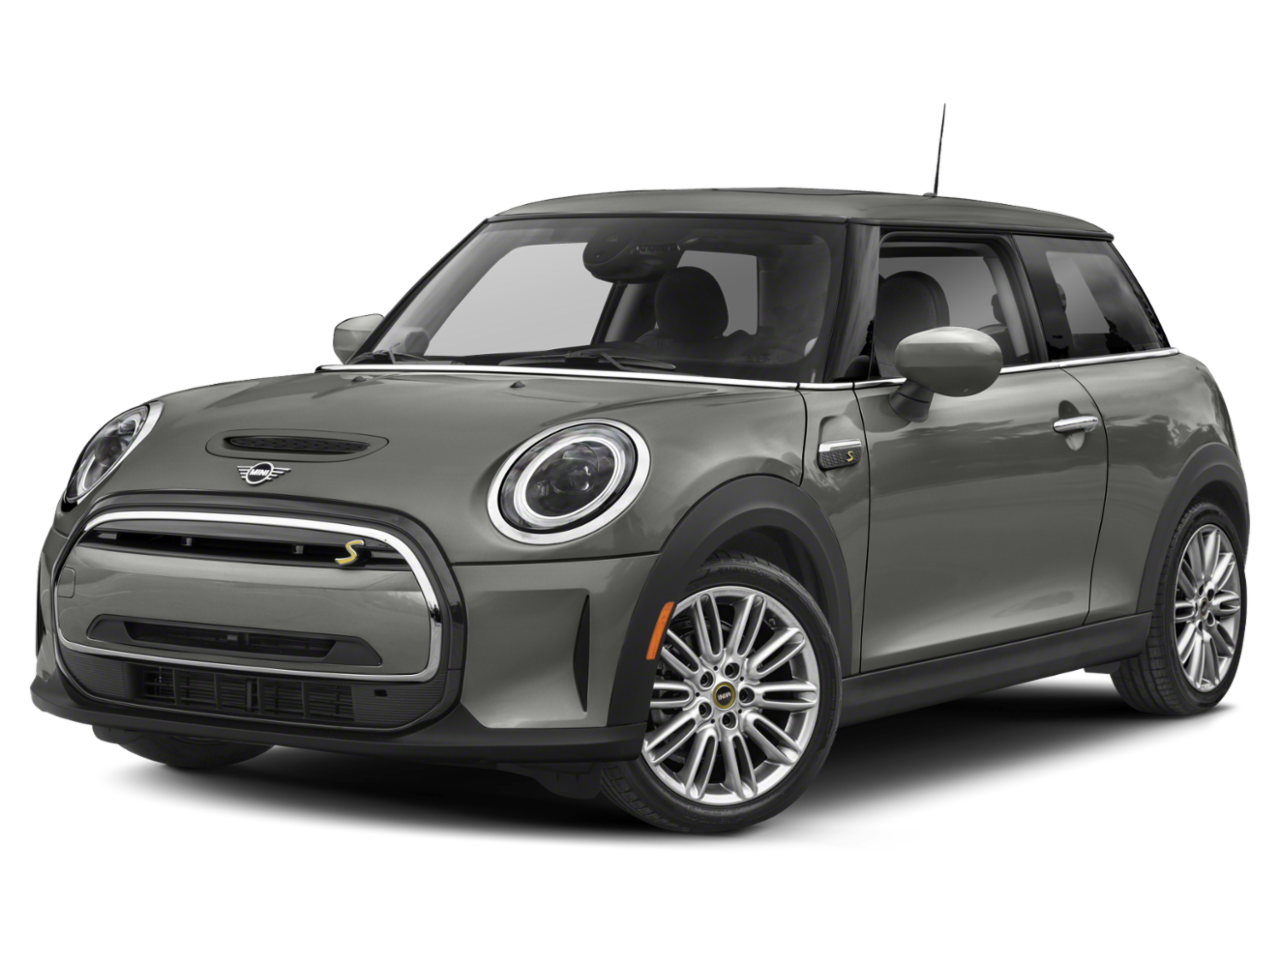 MINI Lease Deals, Finance Offers, Incentives